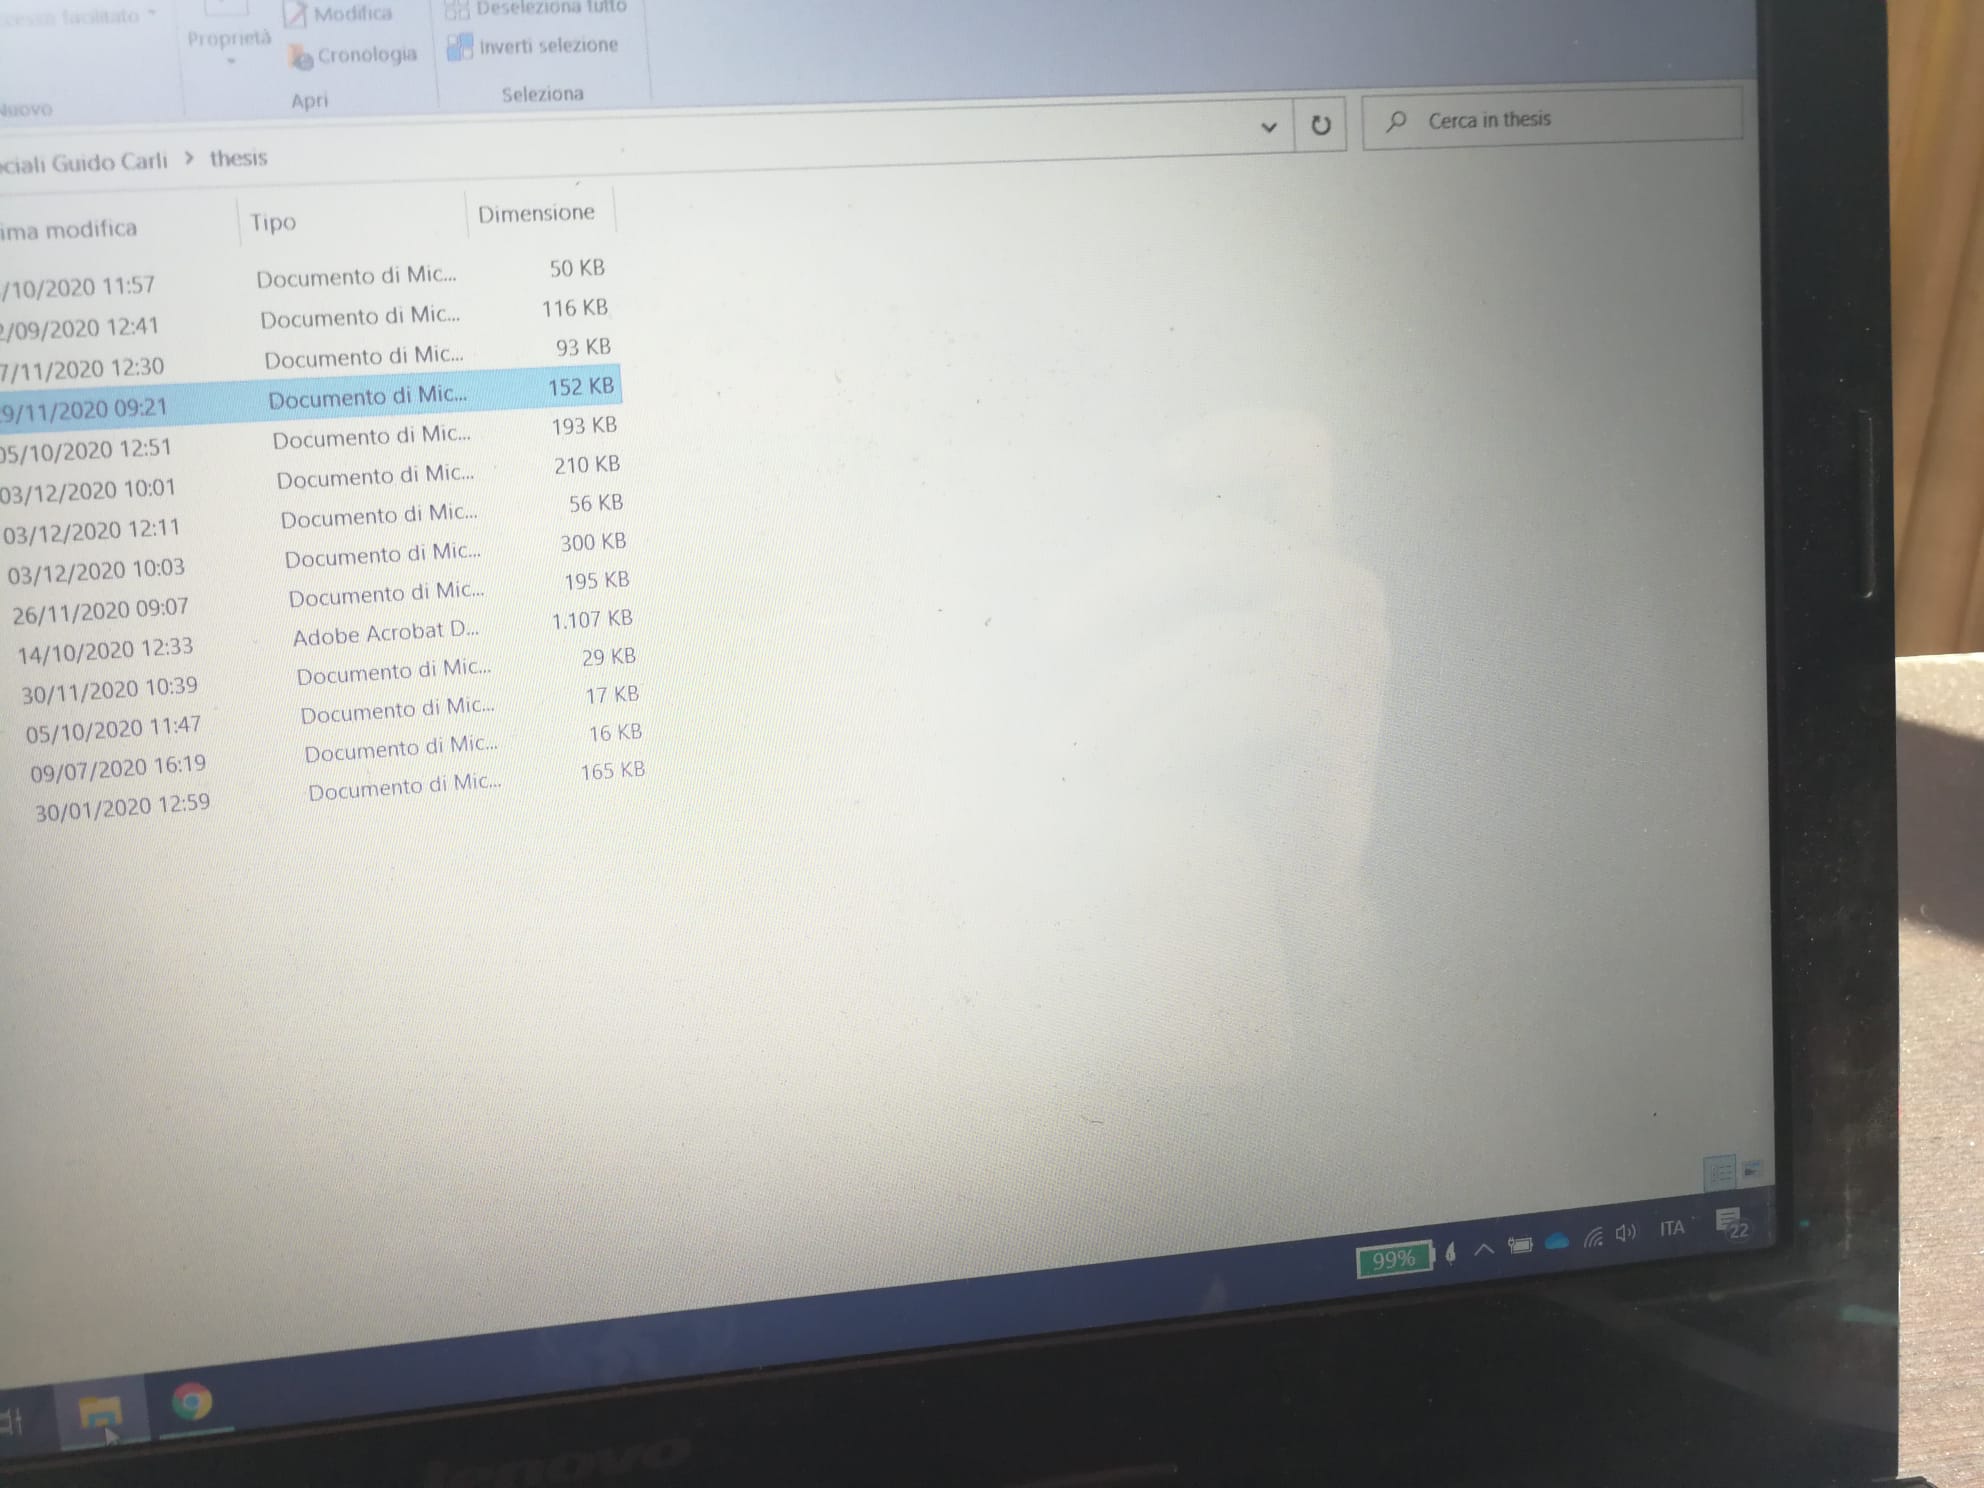 how to remove shadow on computer screen